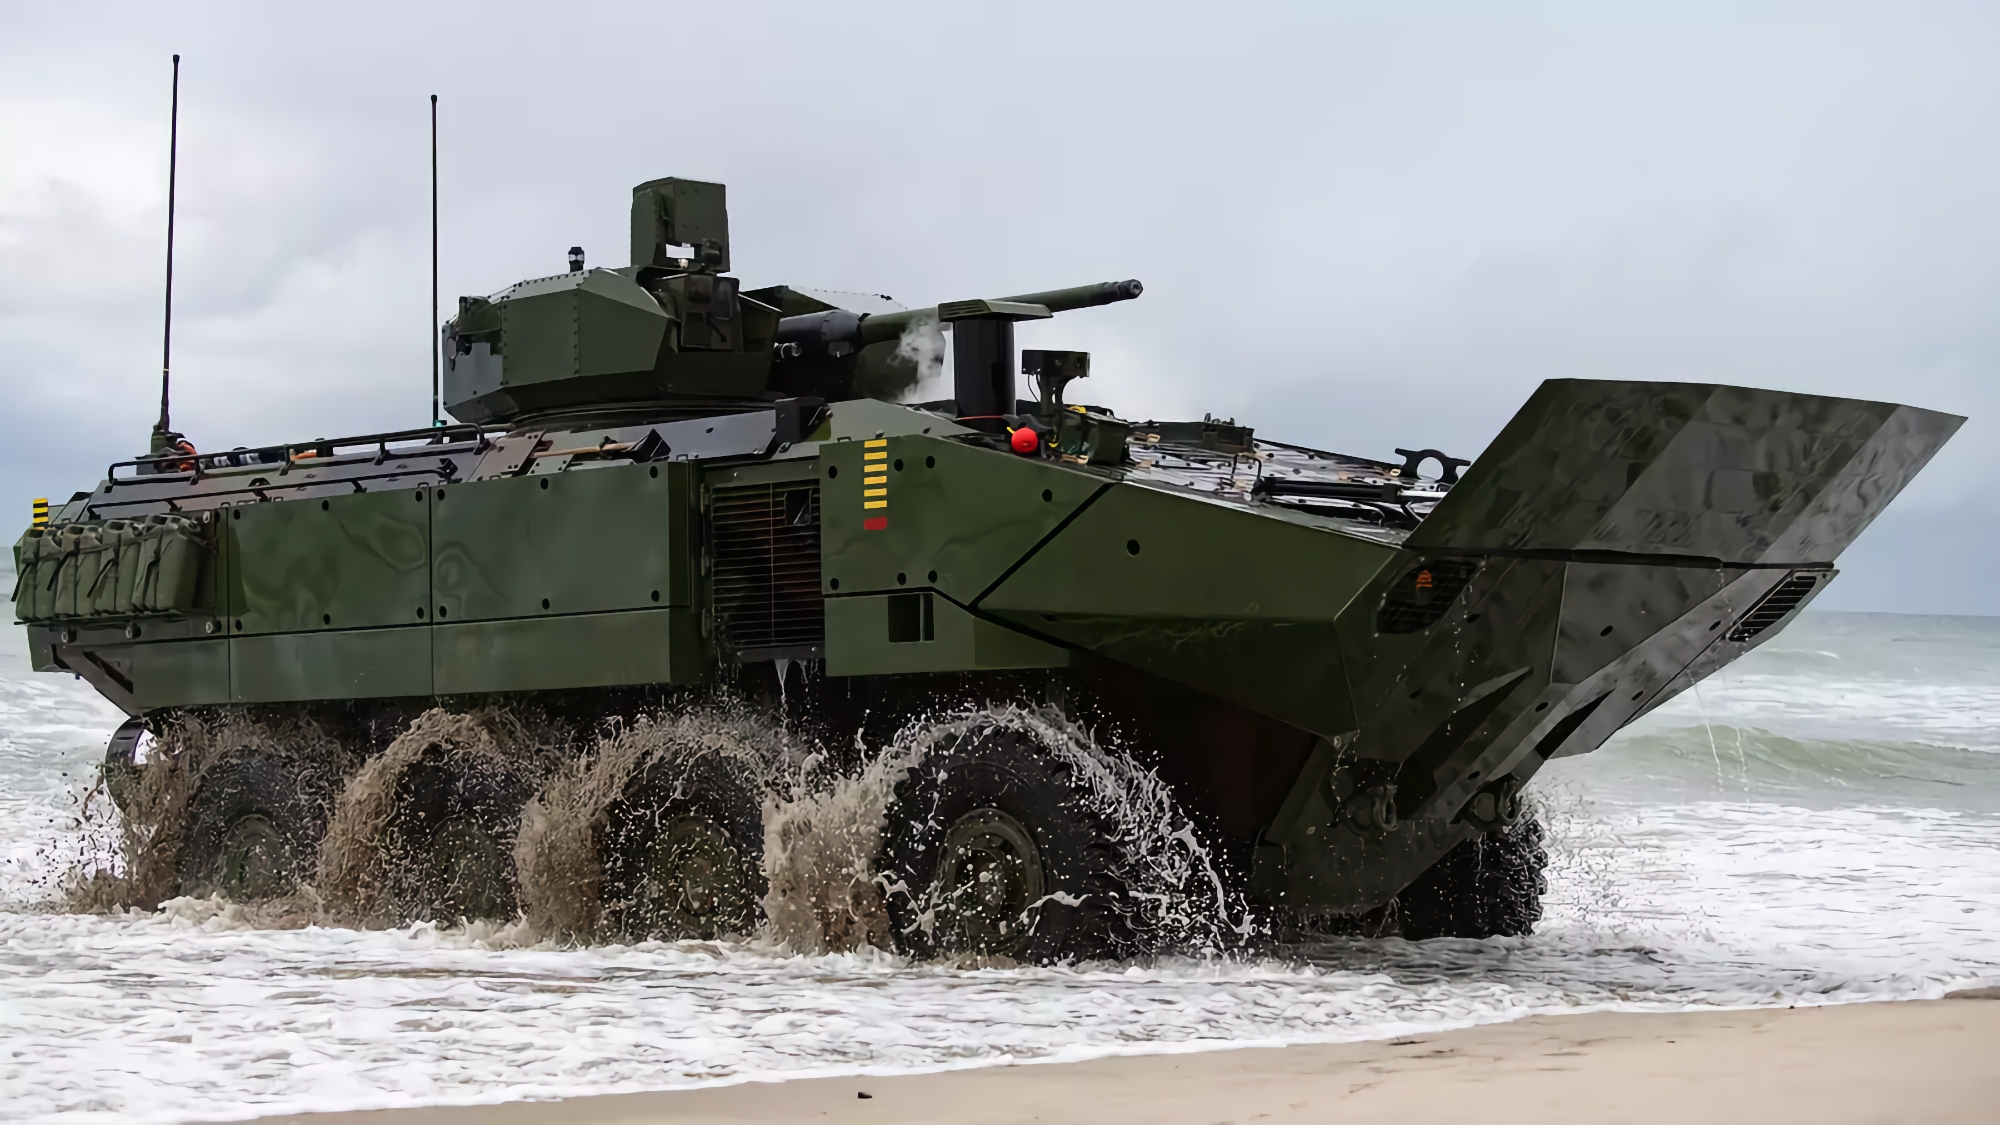 U.S. Marine Corps orders ACV-30 amphibious armored personnel carriers, contract value $88,000,000